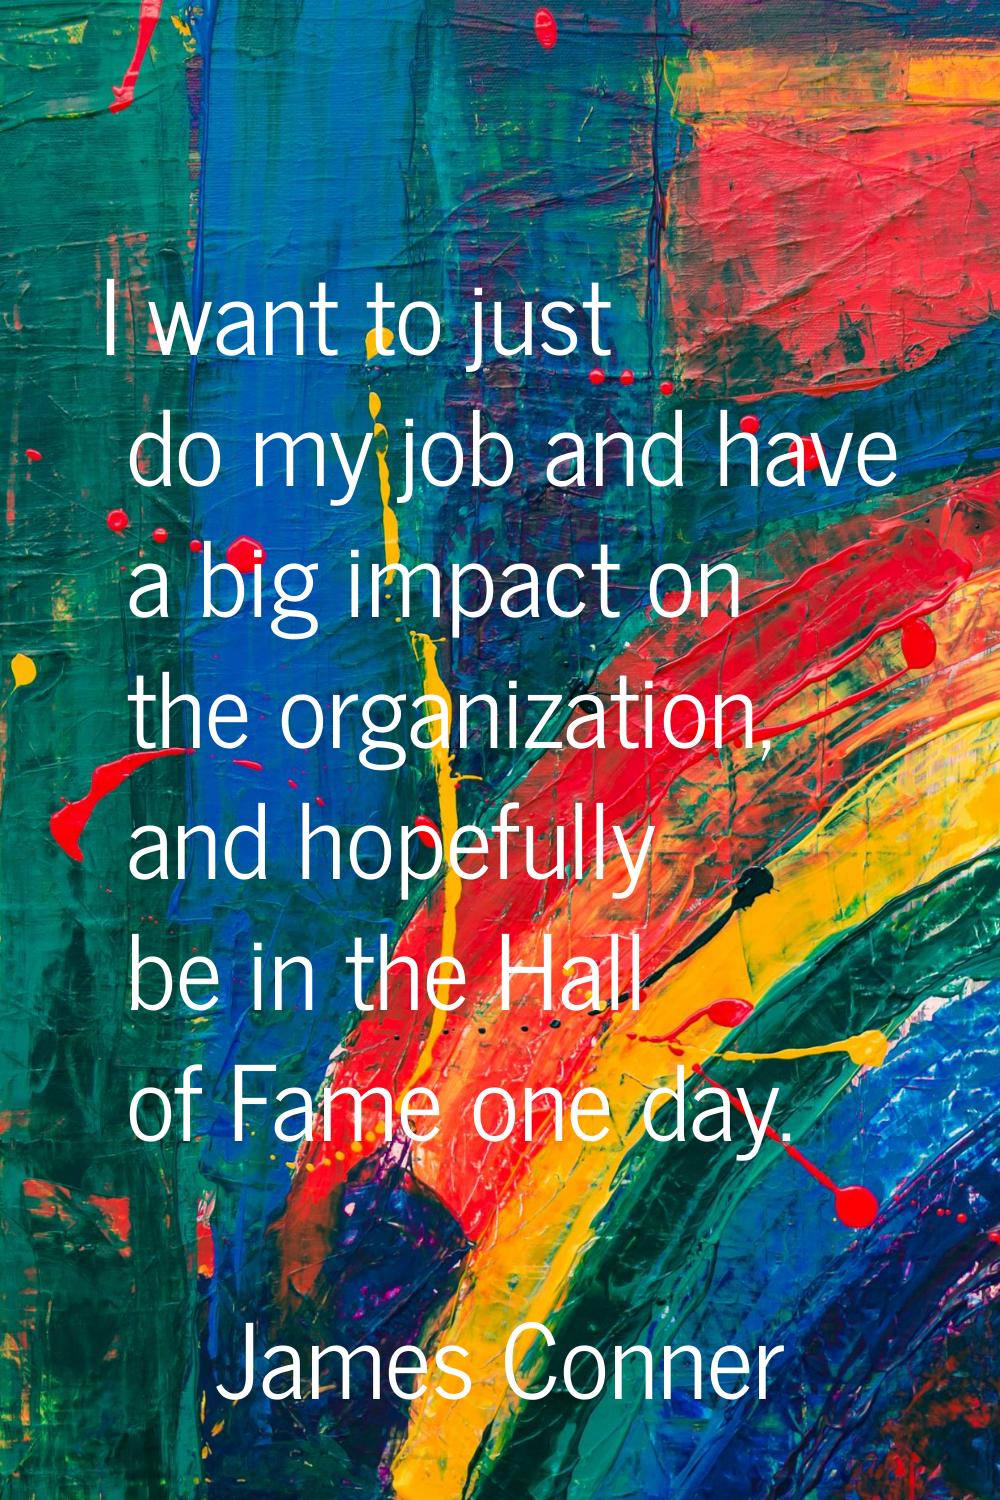 I want to just do my job and have a big impact on the organization, and hopefully be in the Hall of